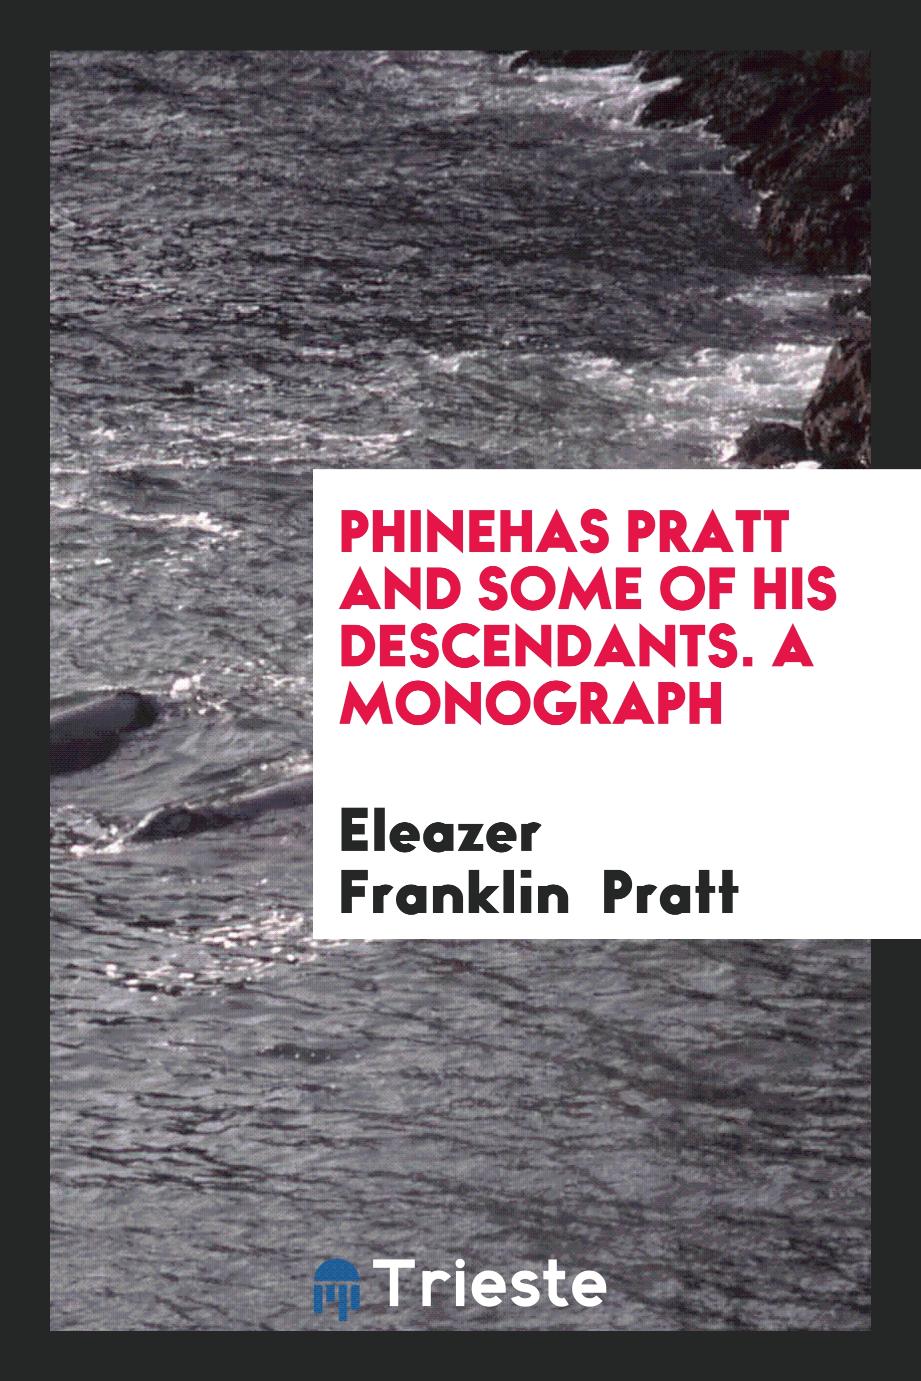 Phinehas Pratt and Some of His Descendants. A Monograph